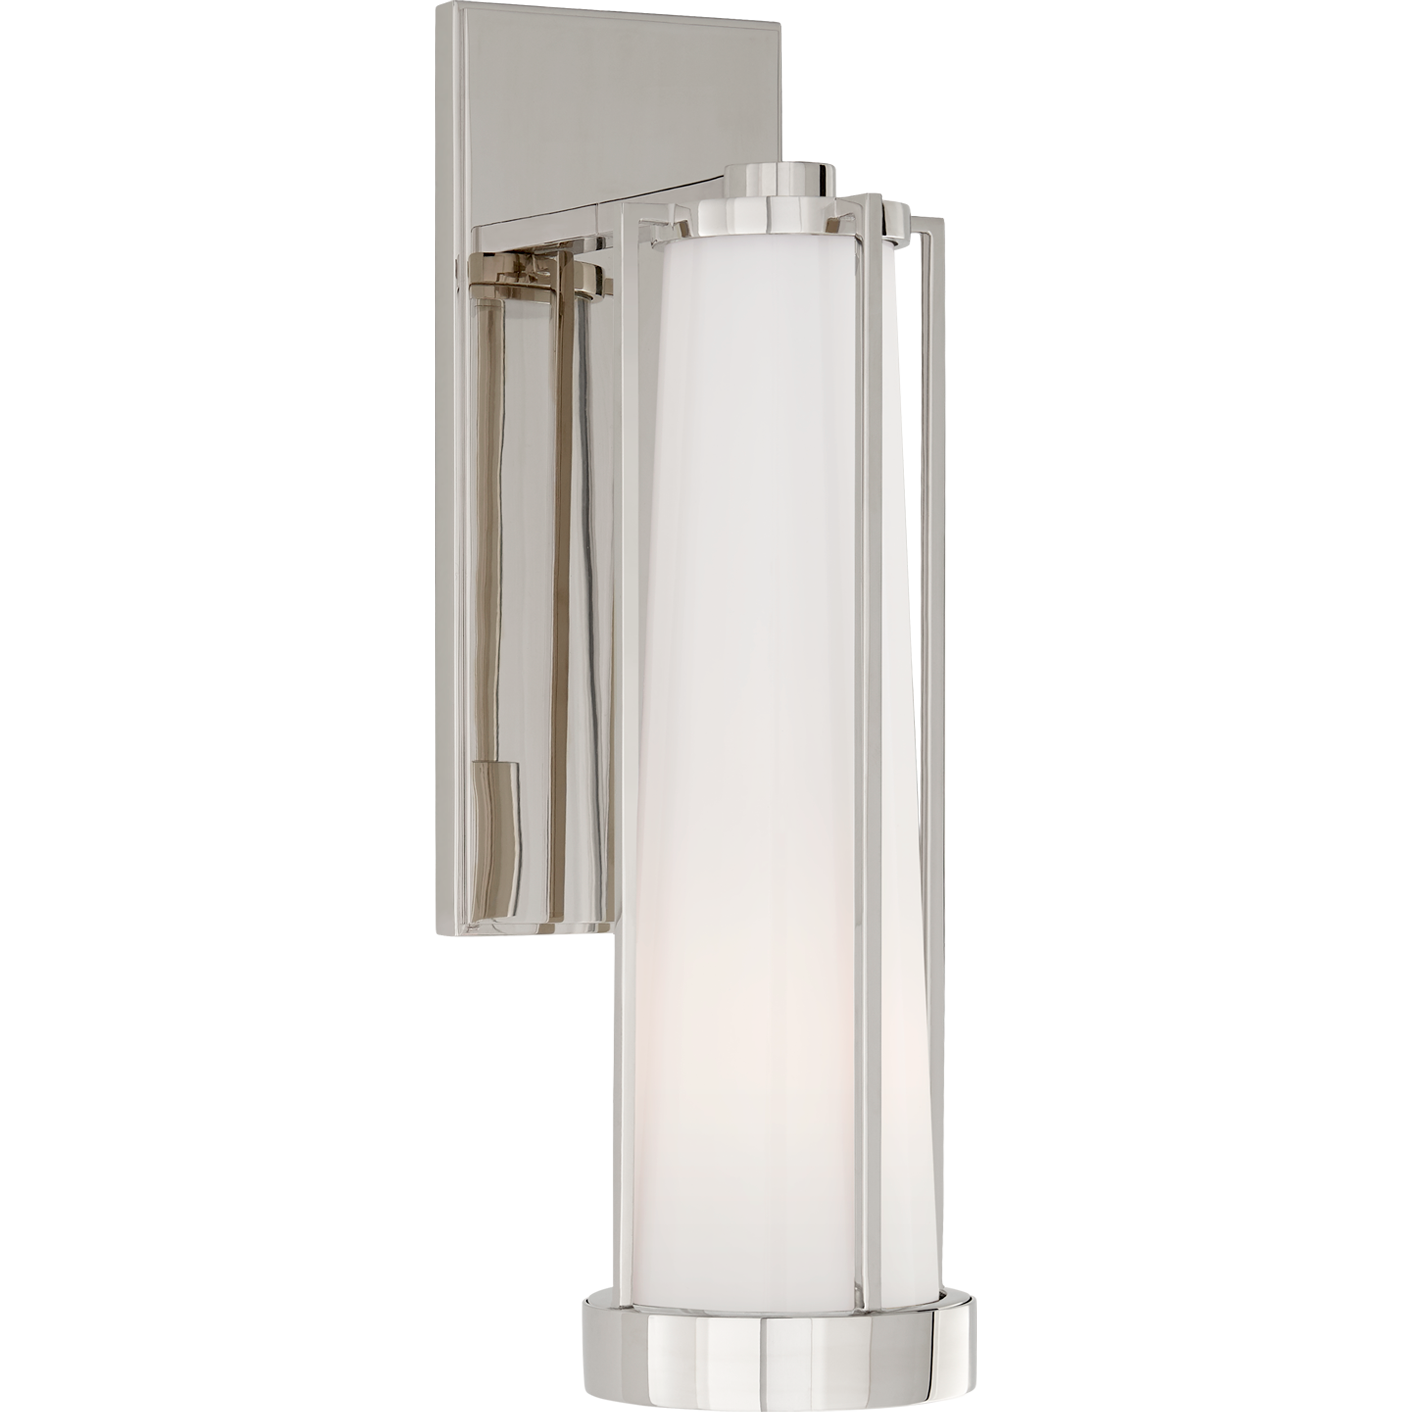 Calix Bracketed Sconce